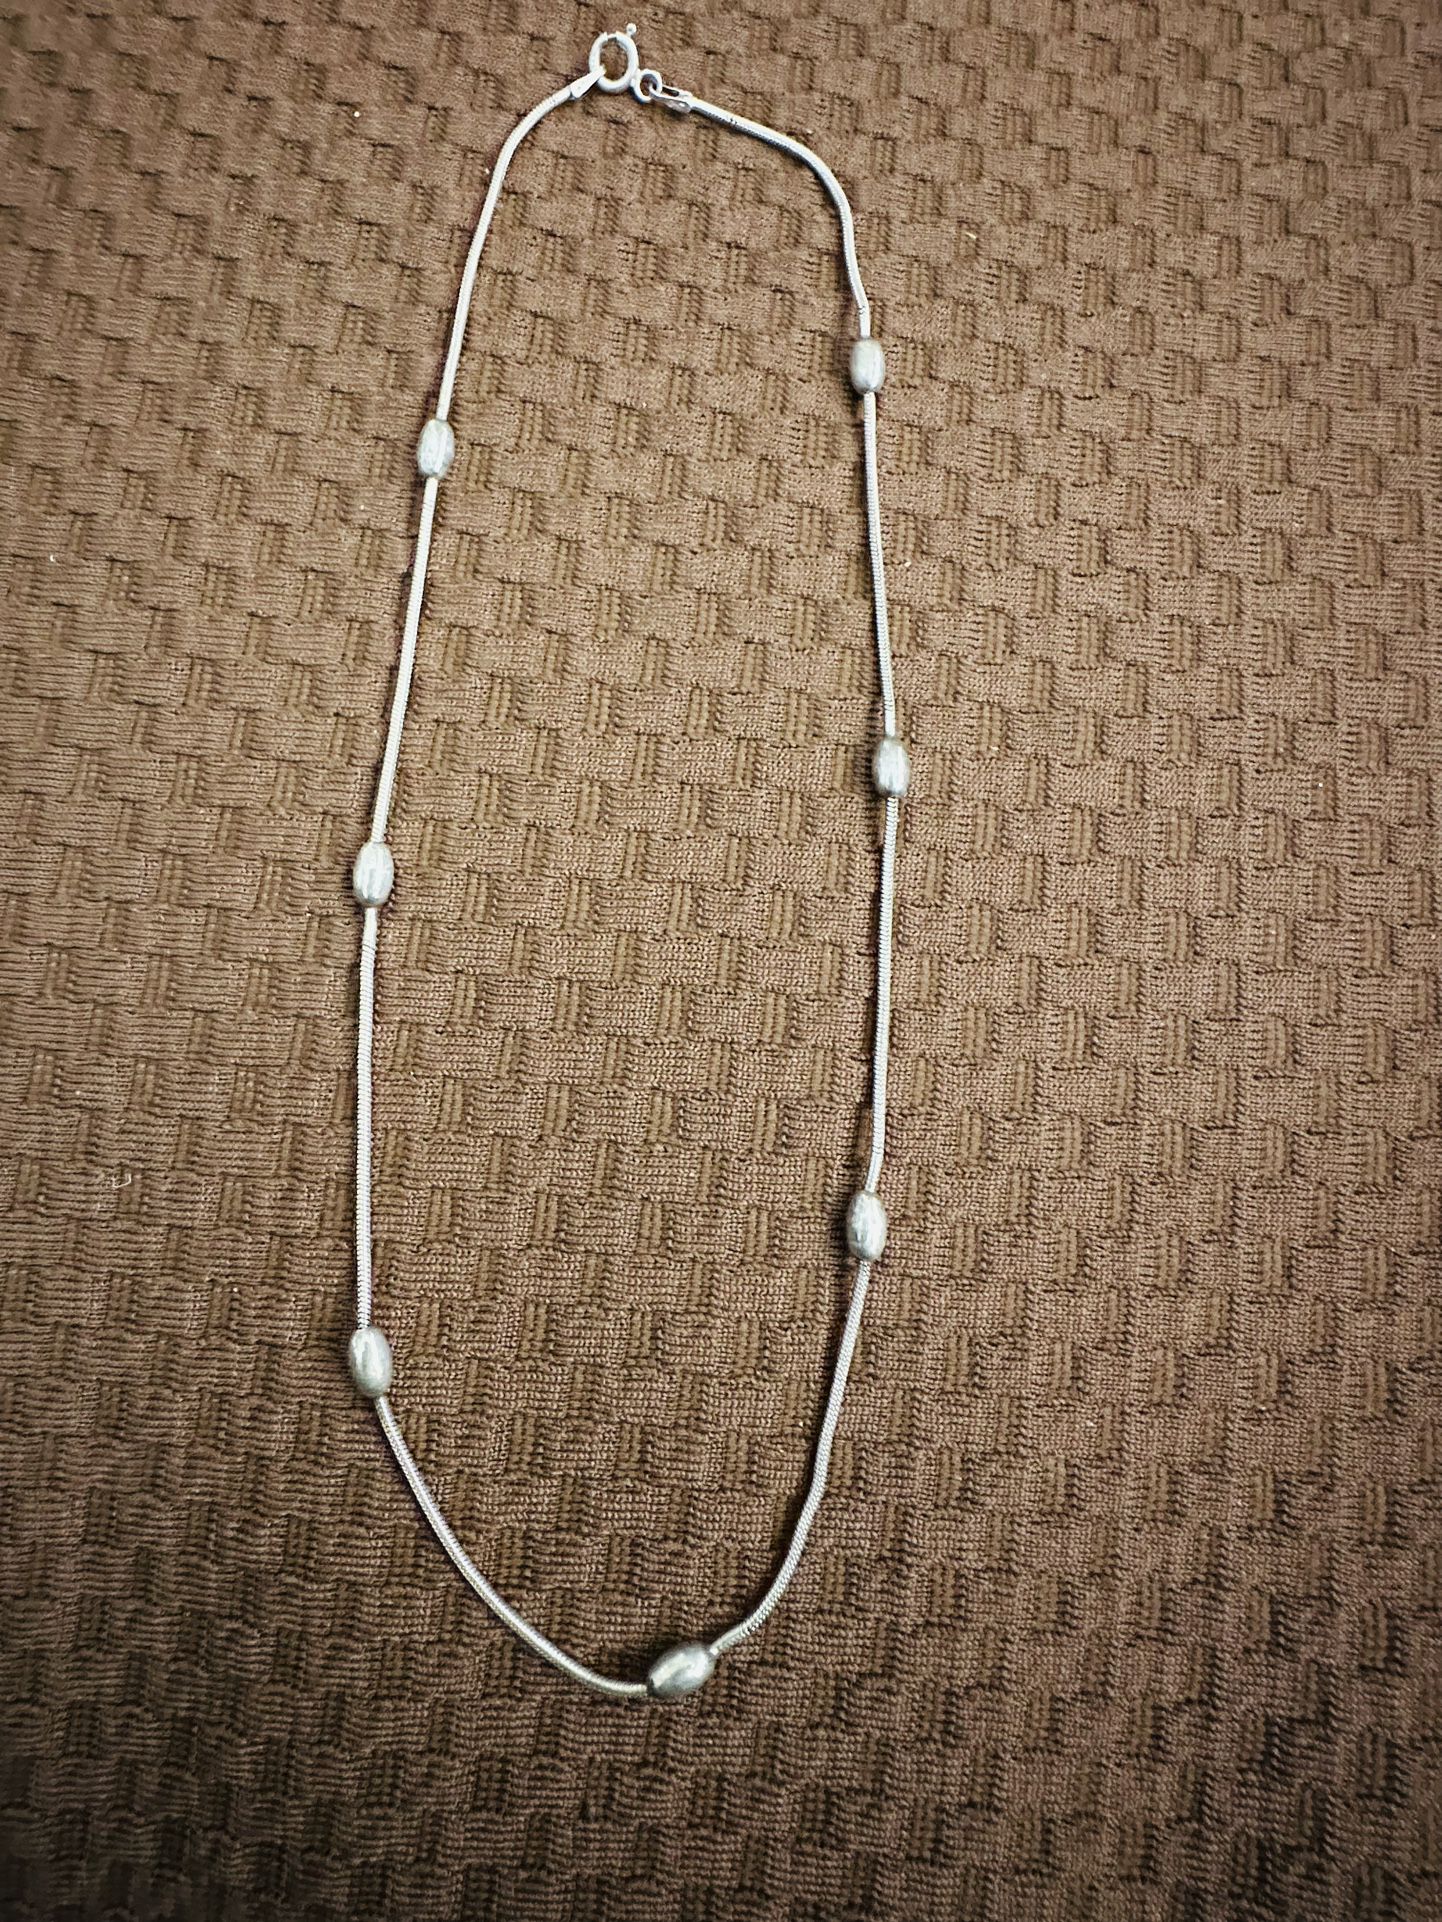 925 REAL SILVER NECKLACE BEATIFUL SOLID PERFECT CONDITION 16 INCHES 